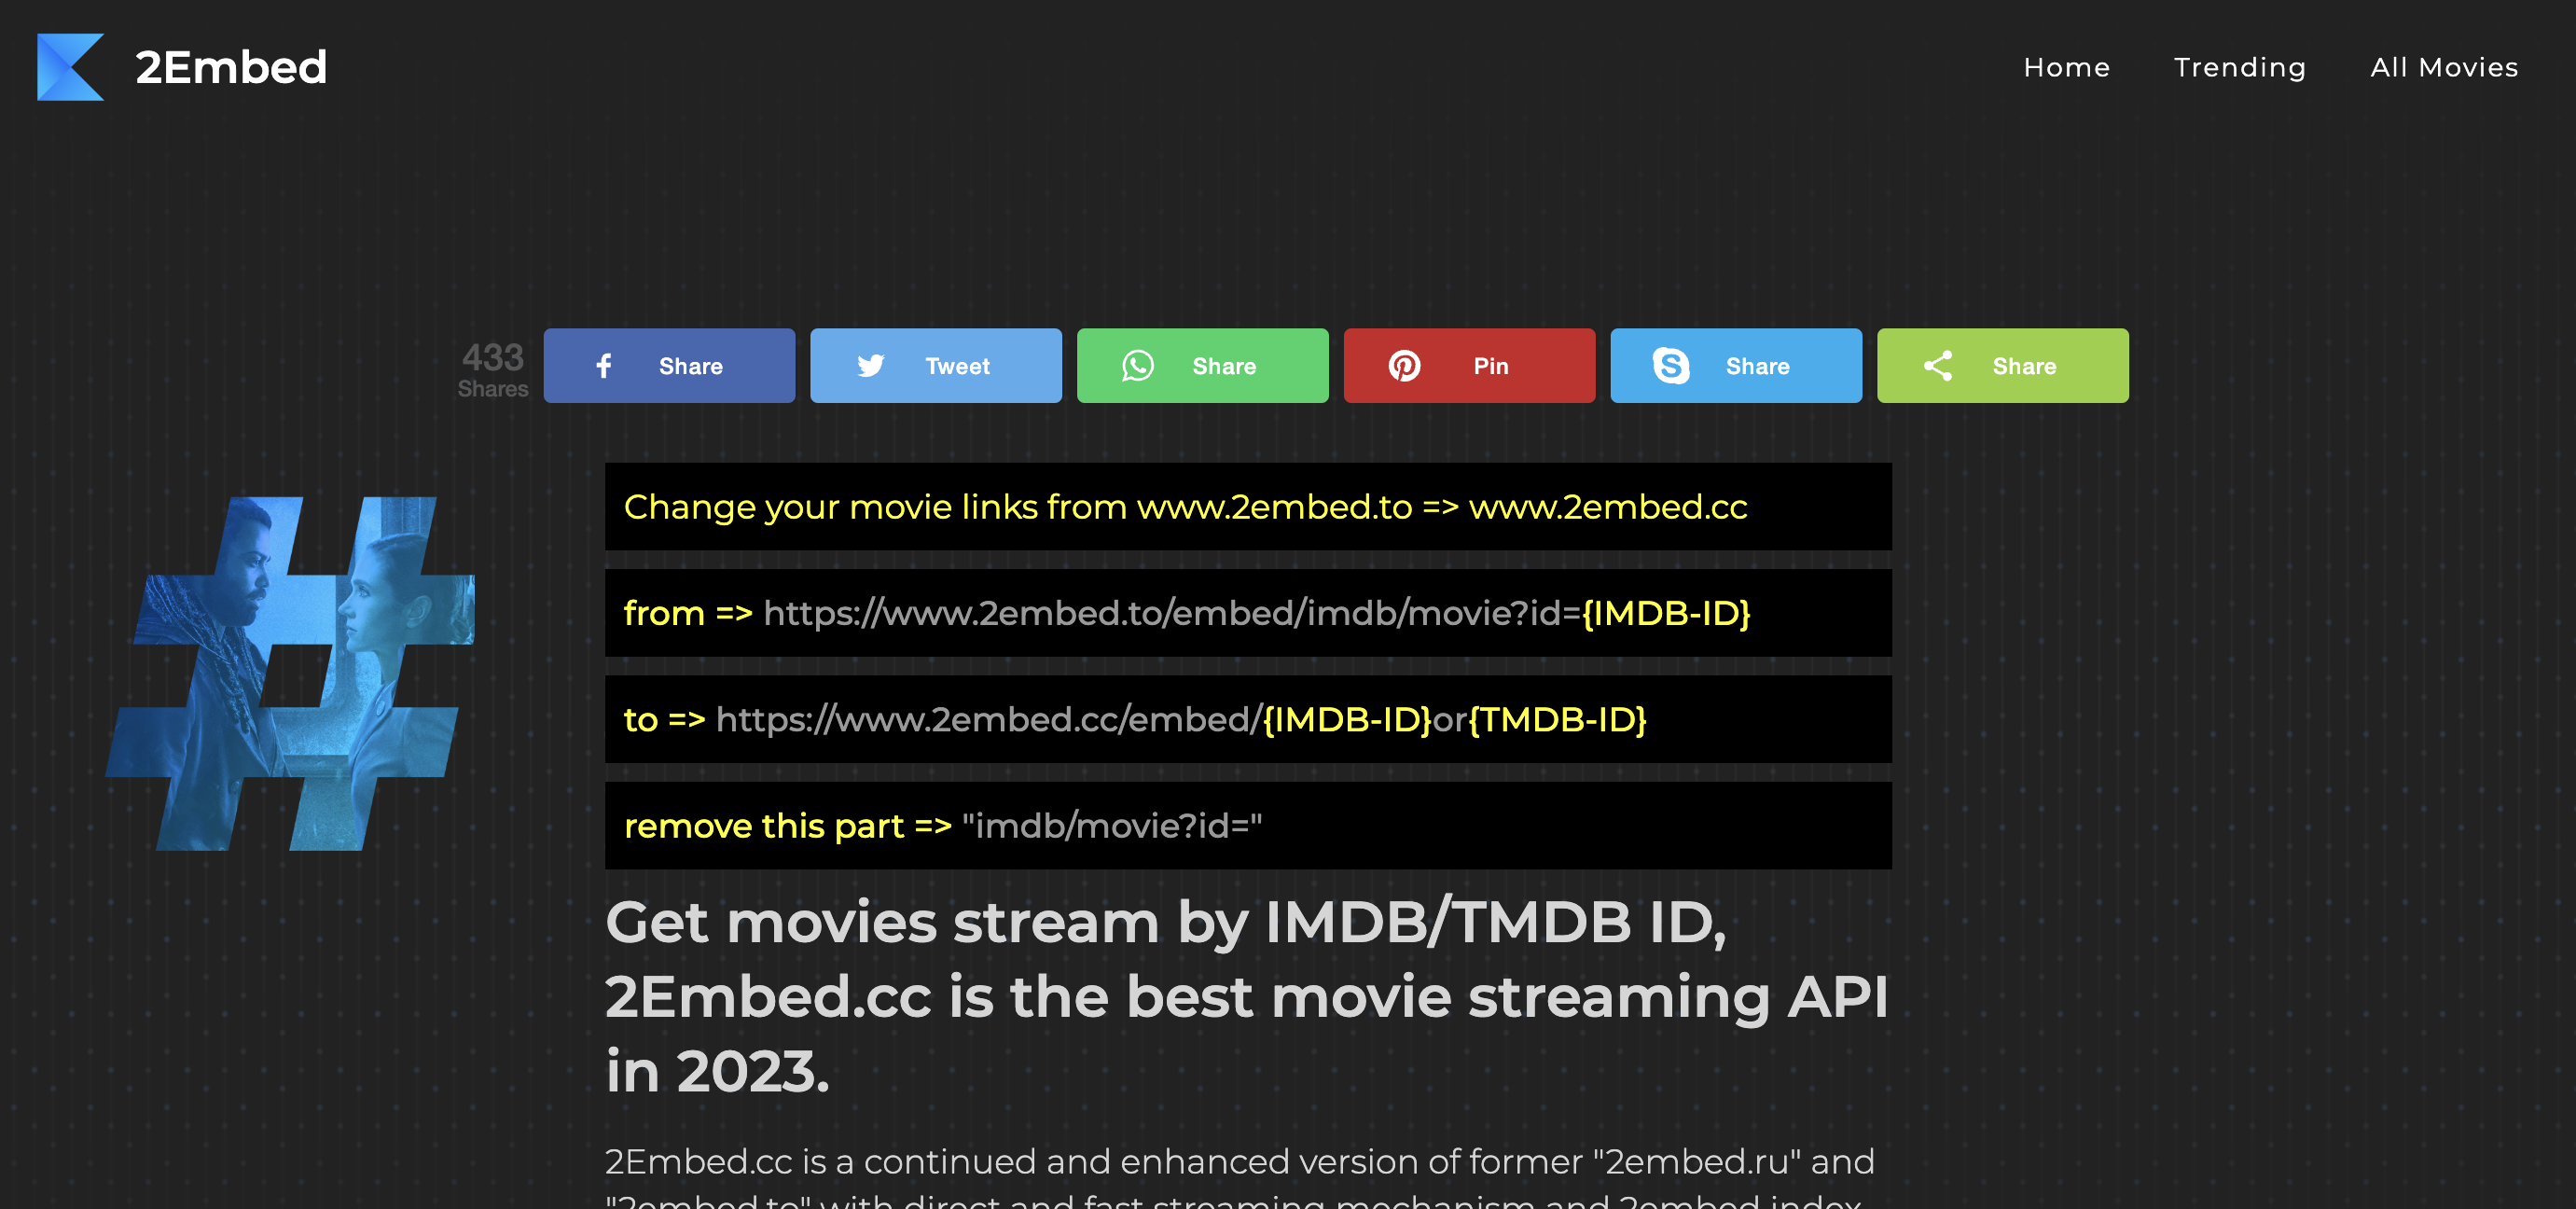 2Embed has supplied various streaming platforms with unauthorized copies of movies and TV shows, making it a significant player in the piracy industry.